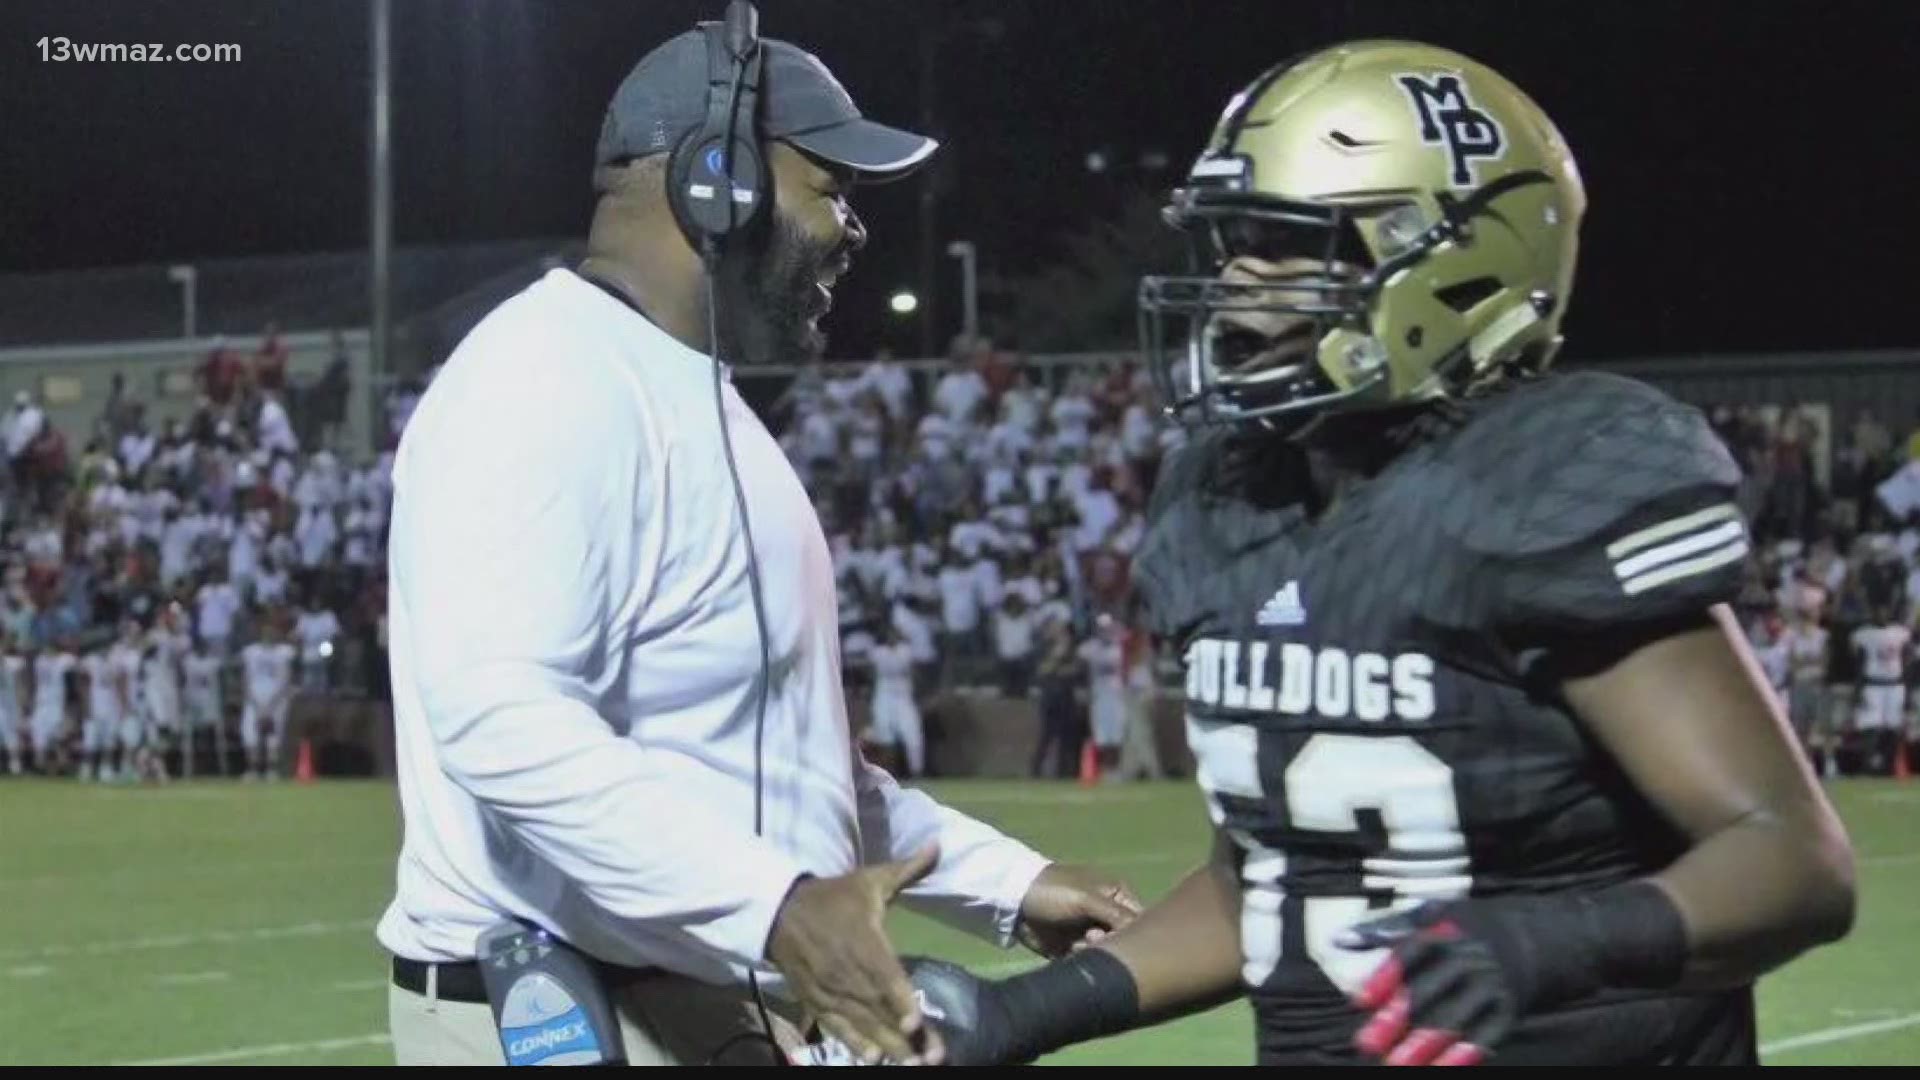 Coach Jarmarcus Johnson joins Rutland coming from Mary Persons High School where he coached offensive line.